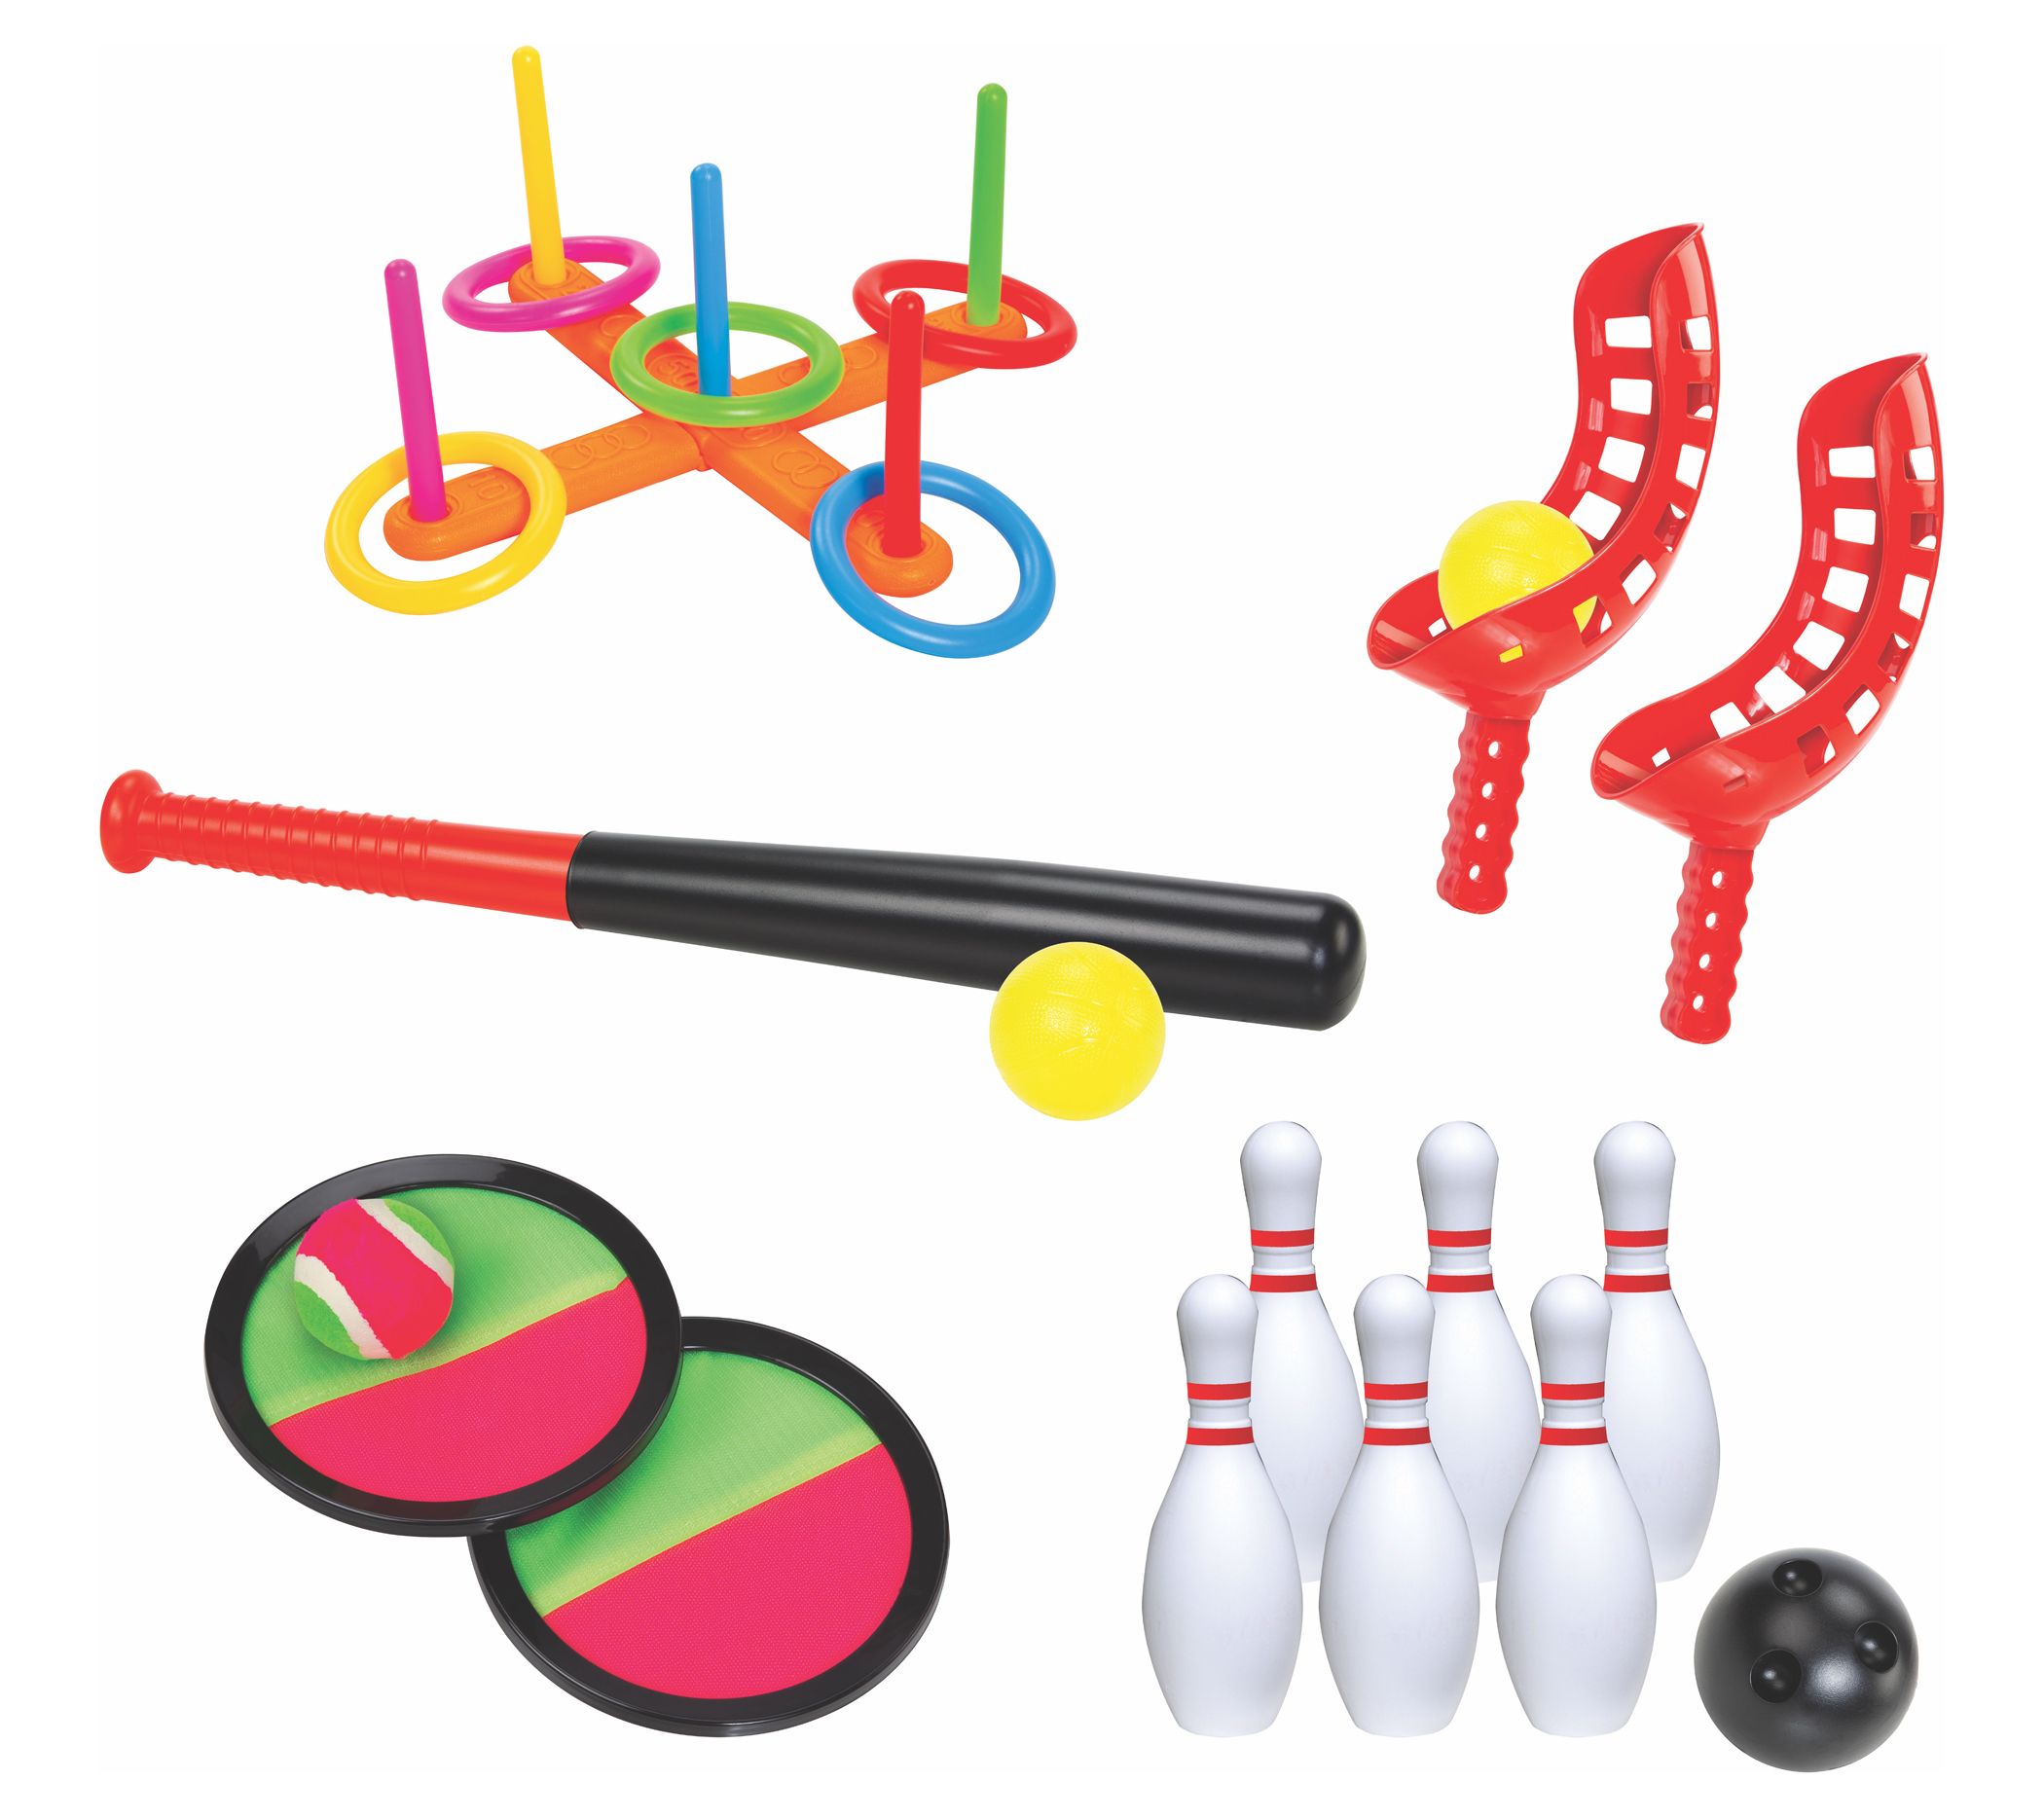 5 in 1 Outdoor Sports Set